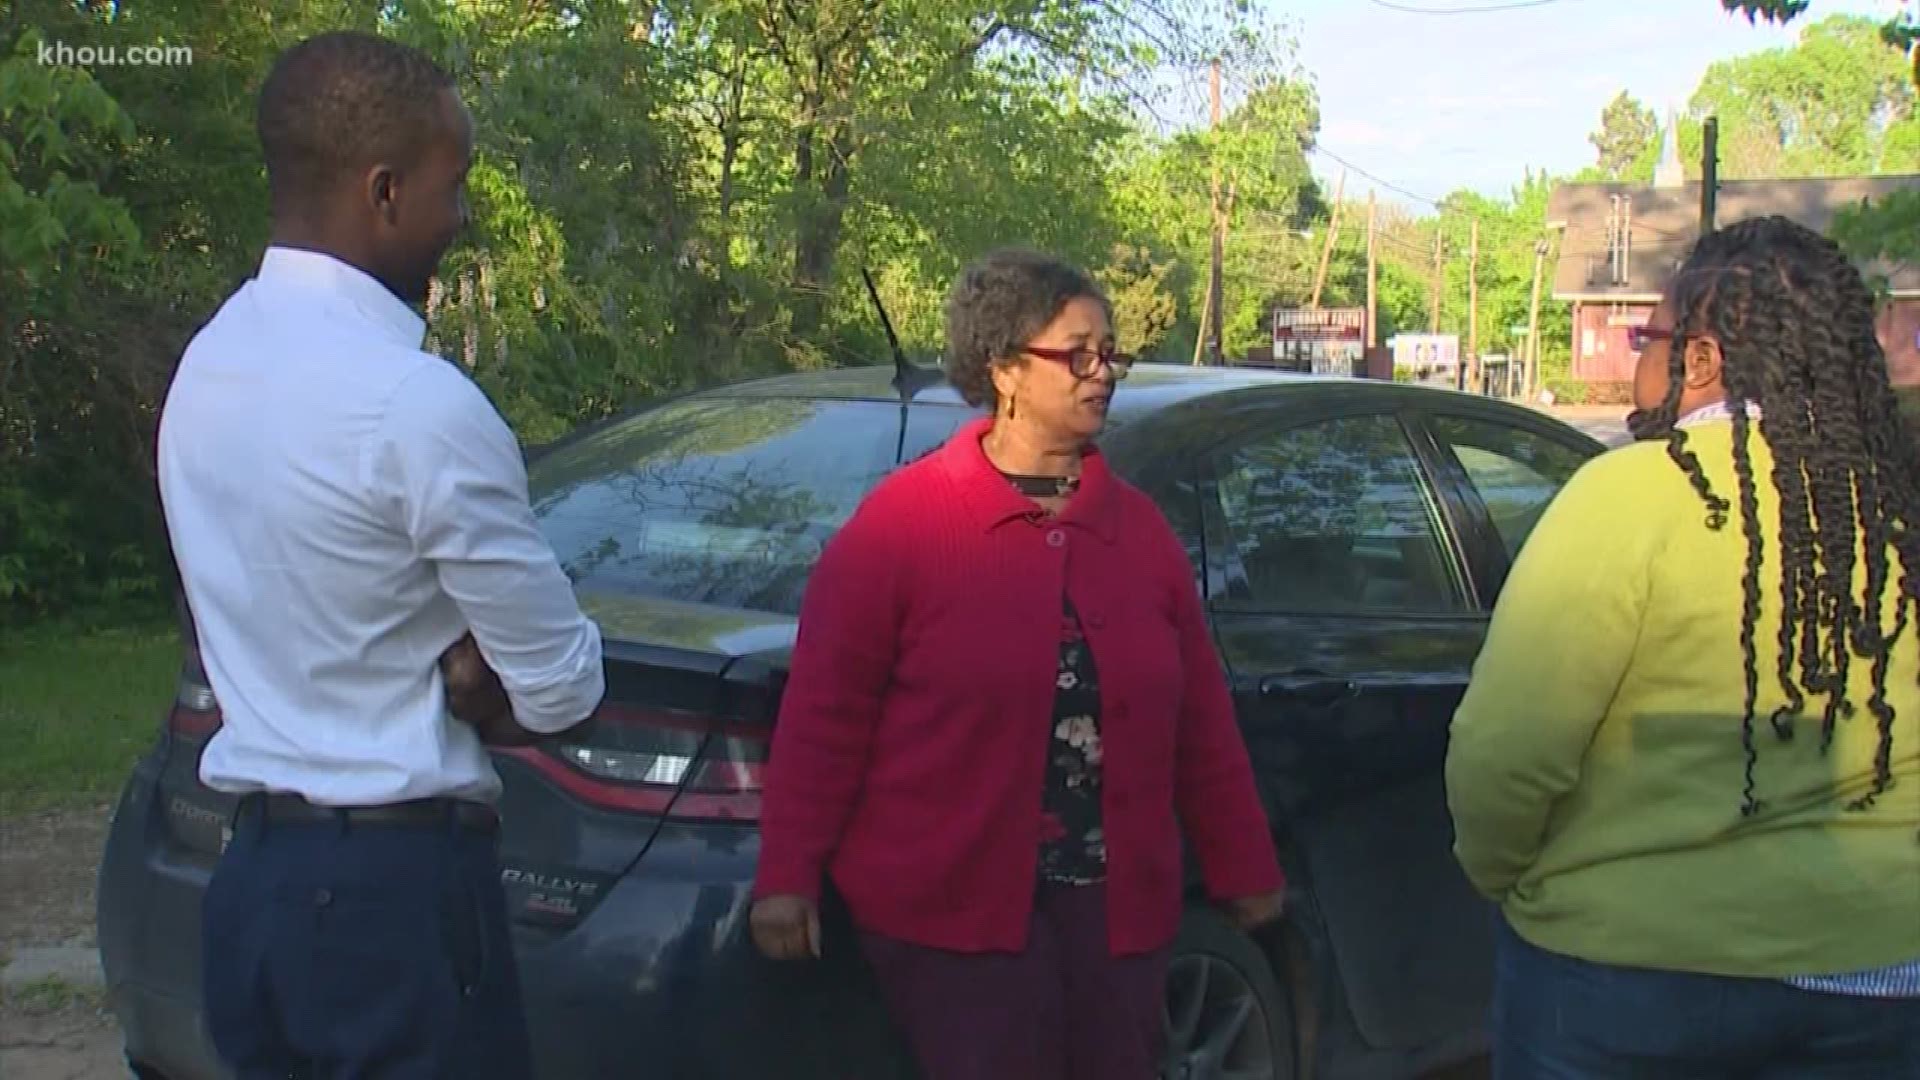 We've learned a 70-year-old grandmother fighting eviction from her property will be able to stay a little while longer while a new attorney takes a look at her case.